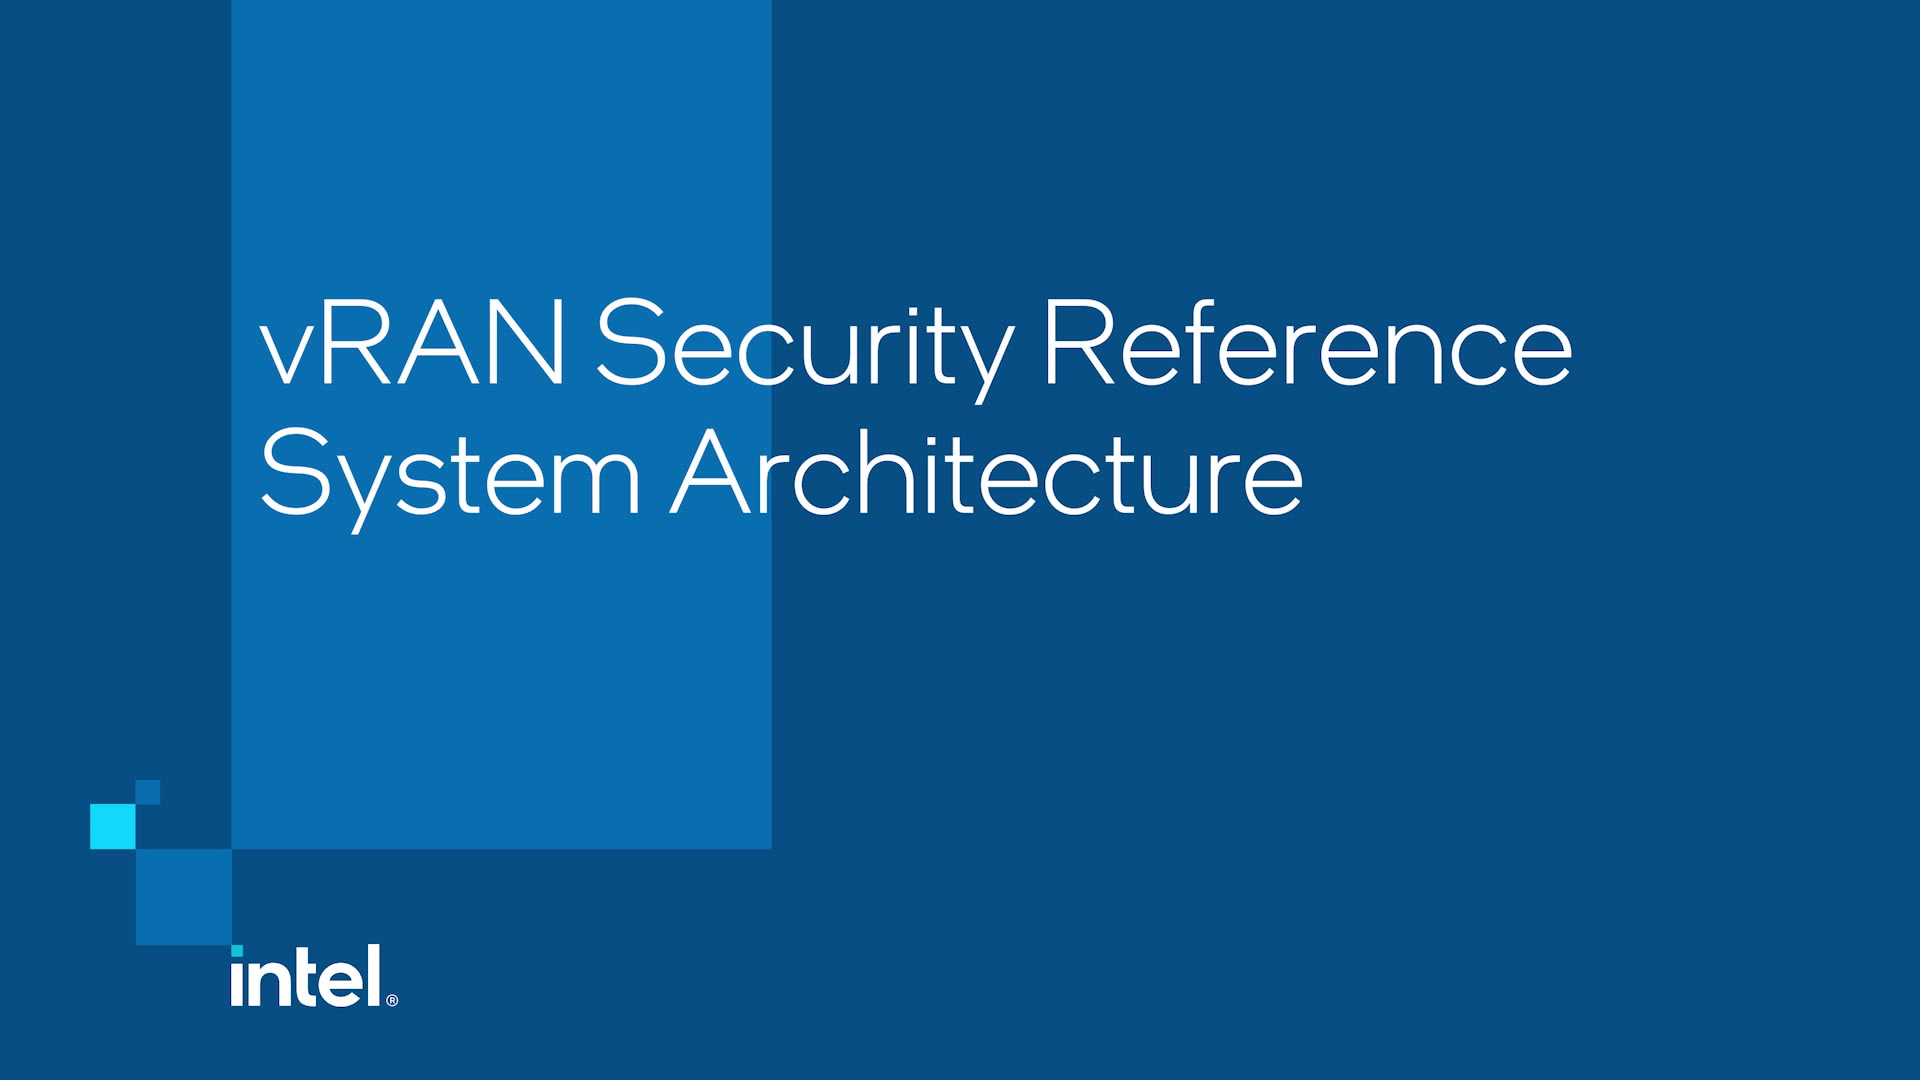 Chapter 1: vRAN Security Reference System Architecture